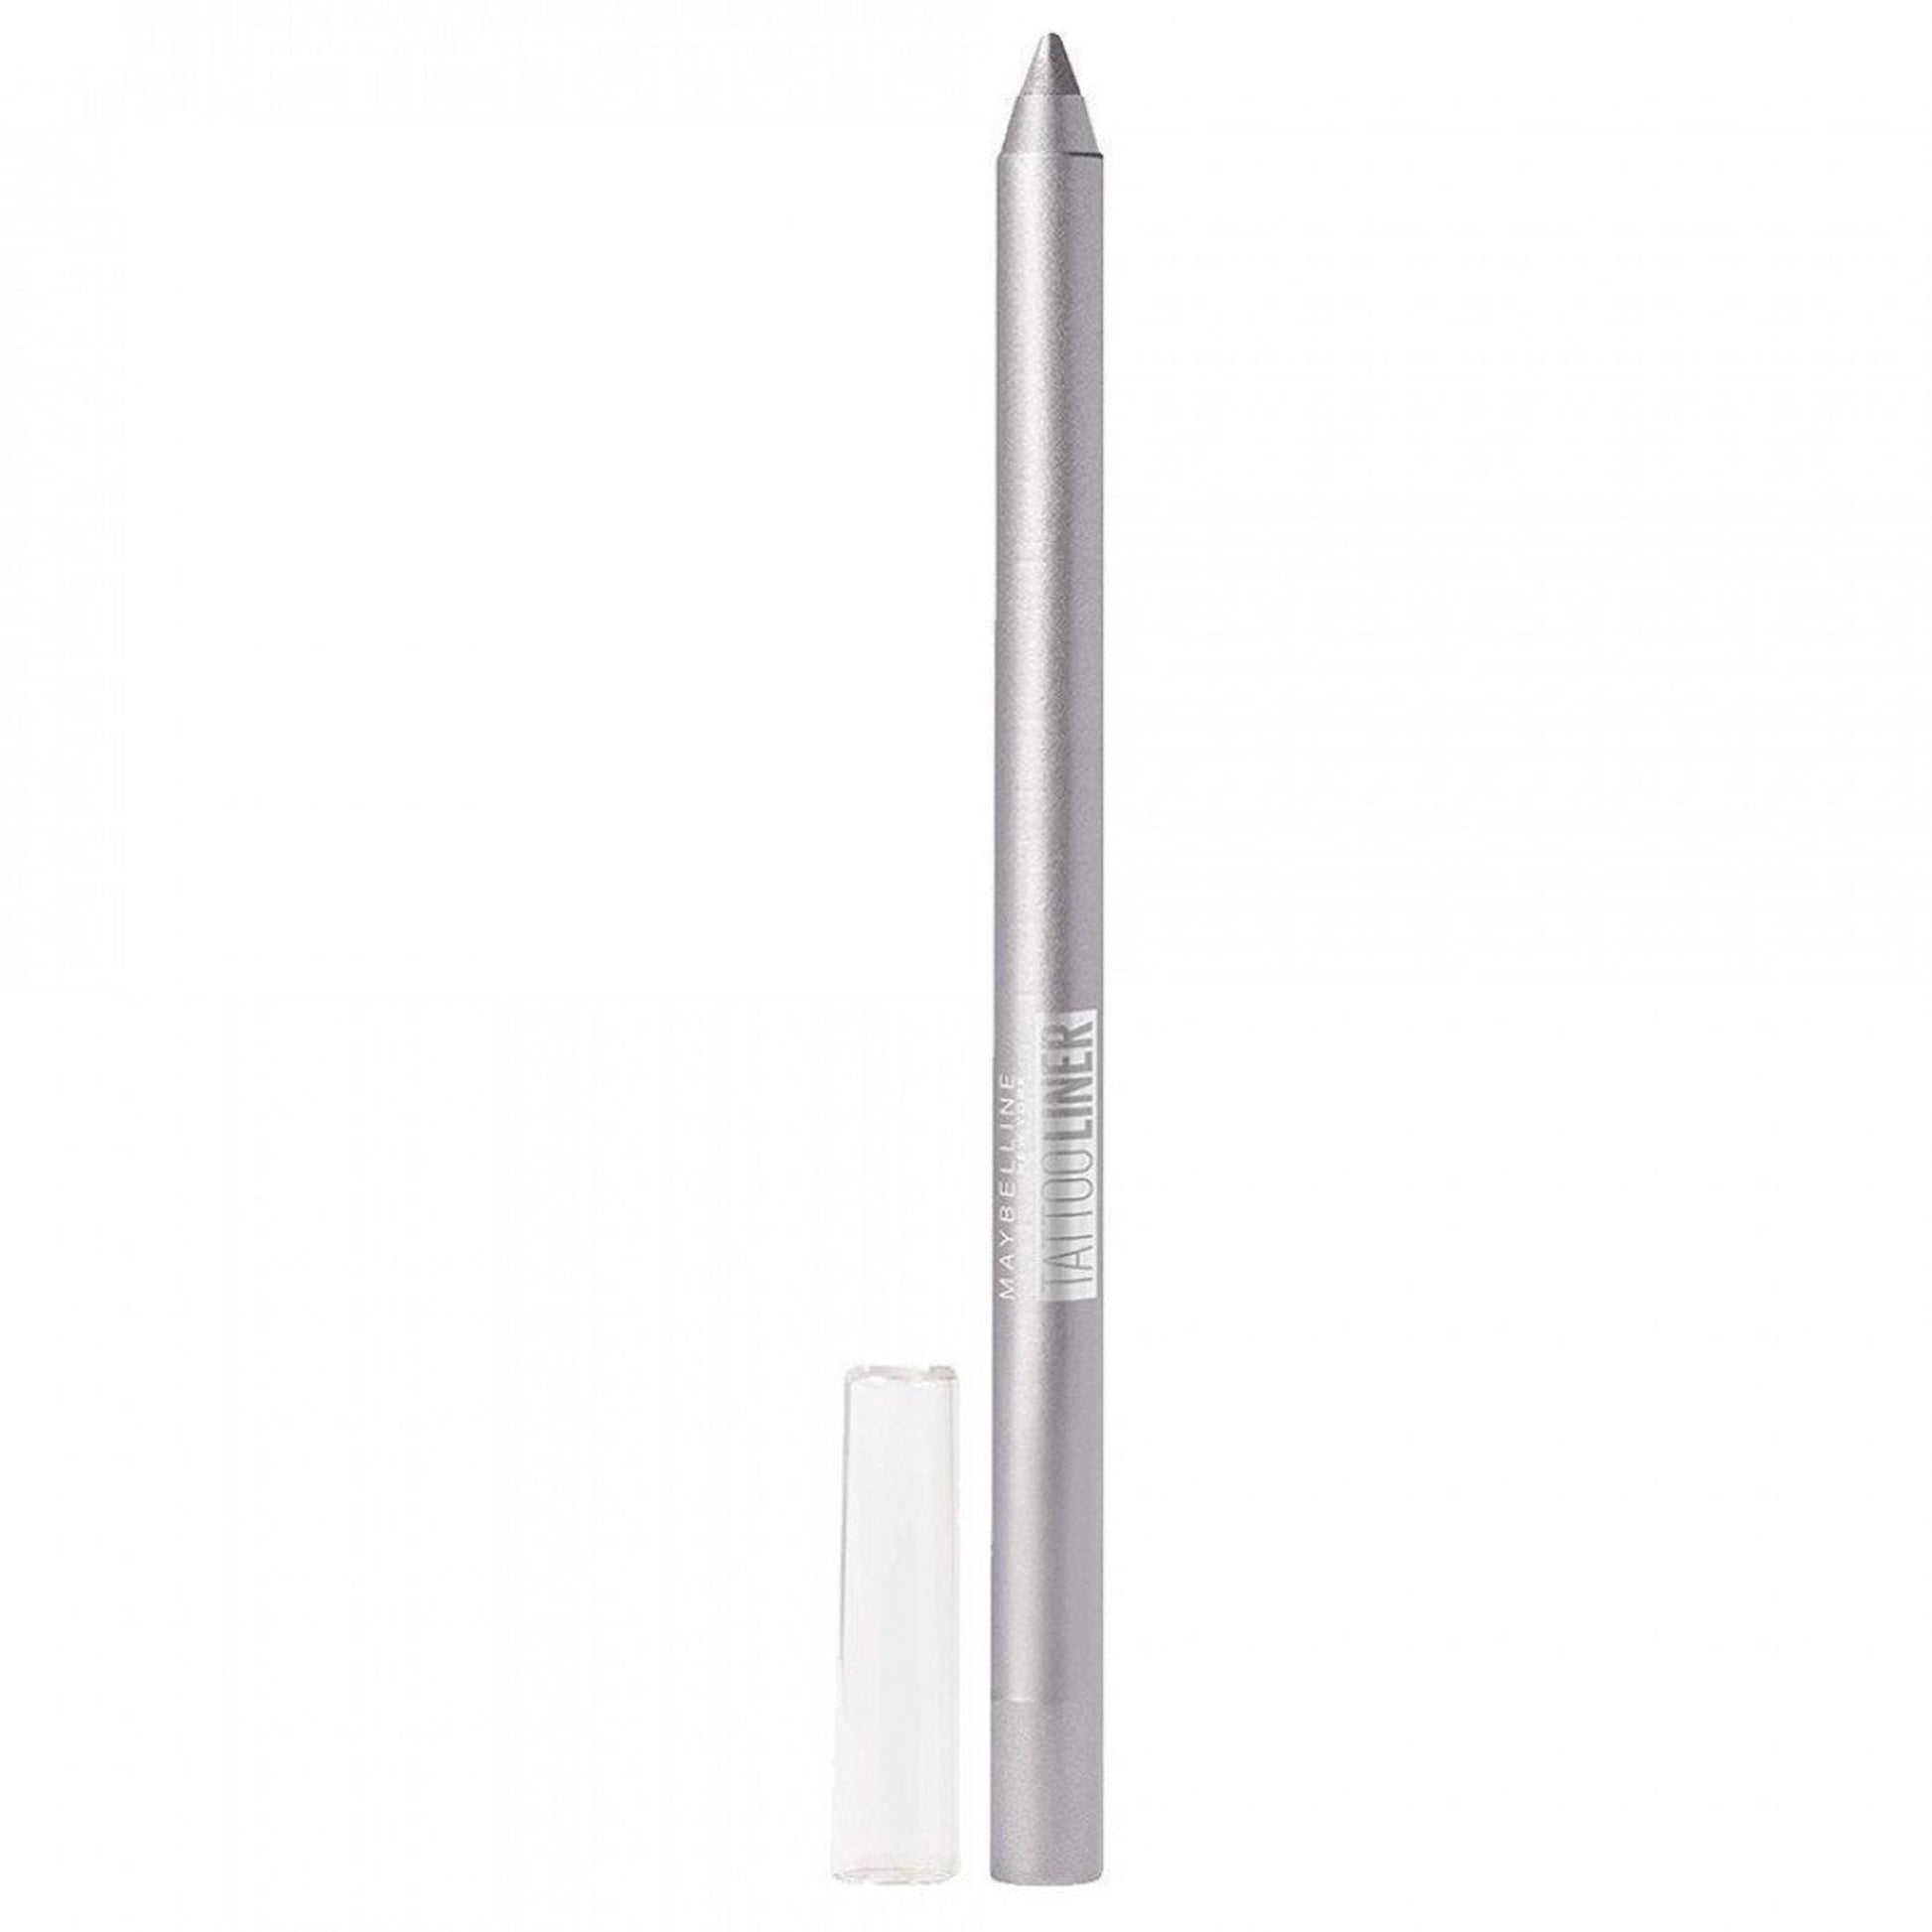 Maybelline Tattoo Liner Gel Pencil 961 Sparkling Silver-Maybelline-BeautyNmakeup.co.uk